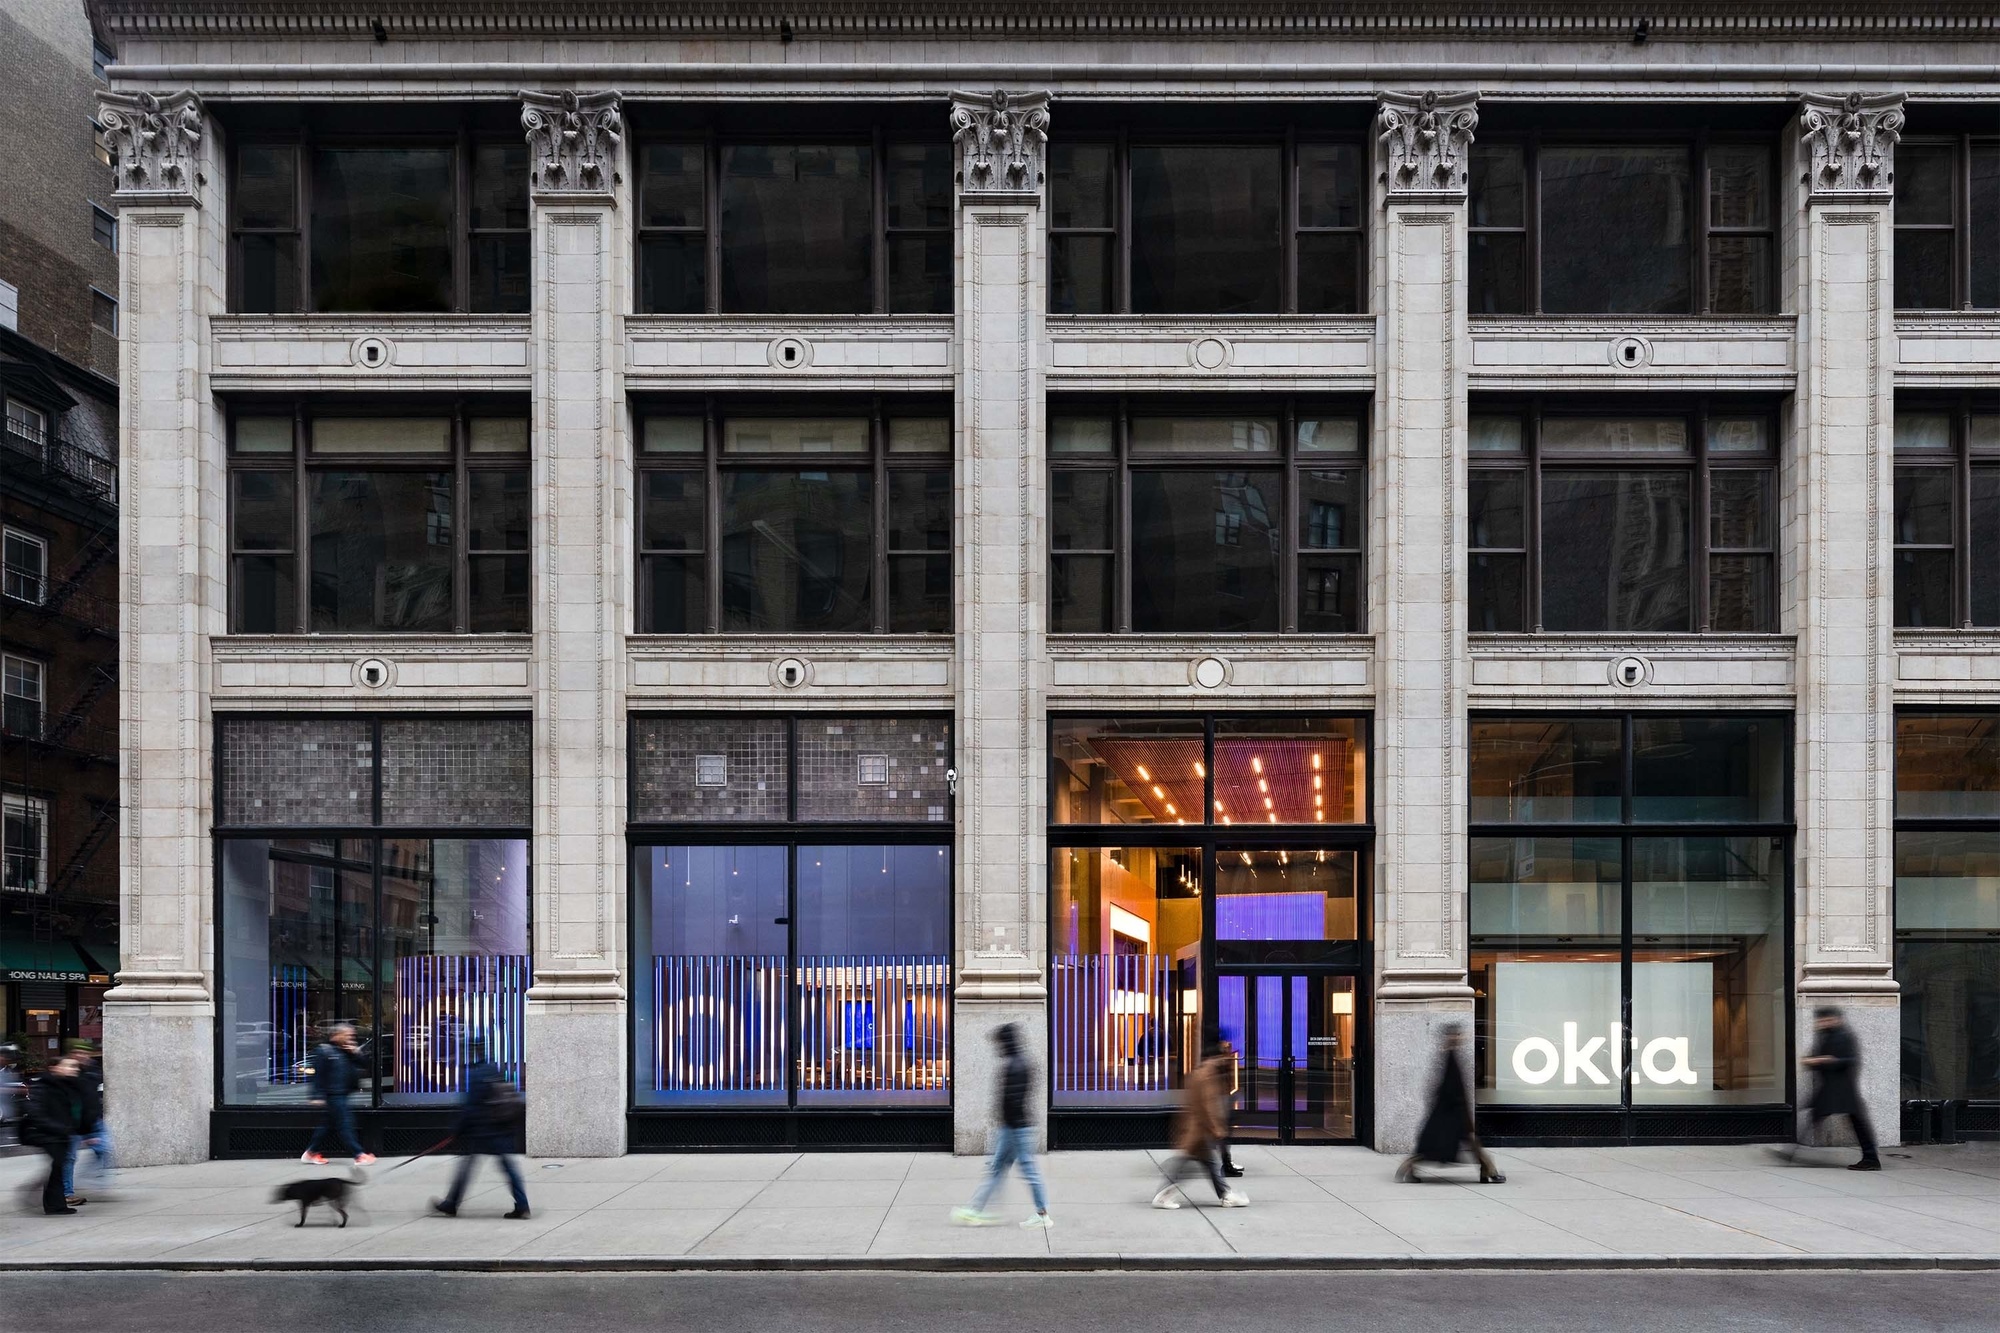 Image of classical architectural exterior of the building that houses the Okta sales center with a number of pedestrians walking past, and the interactive Okta animation visible from the window